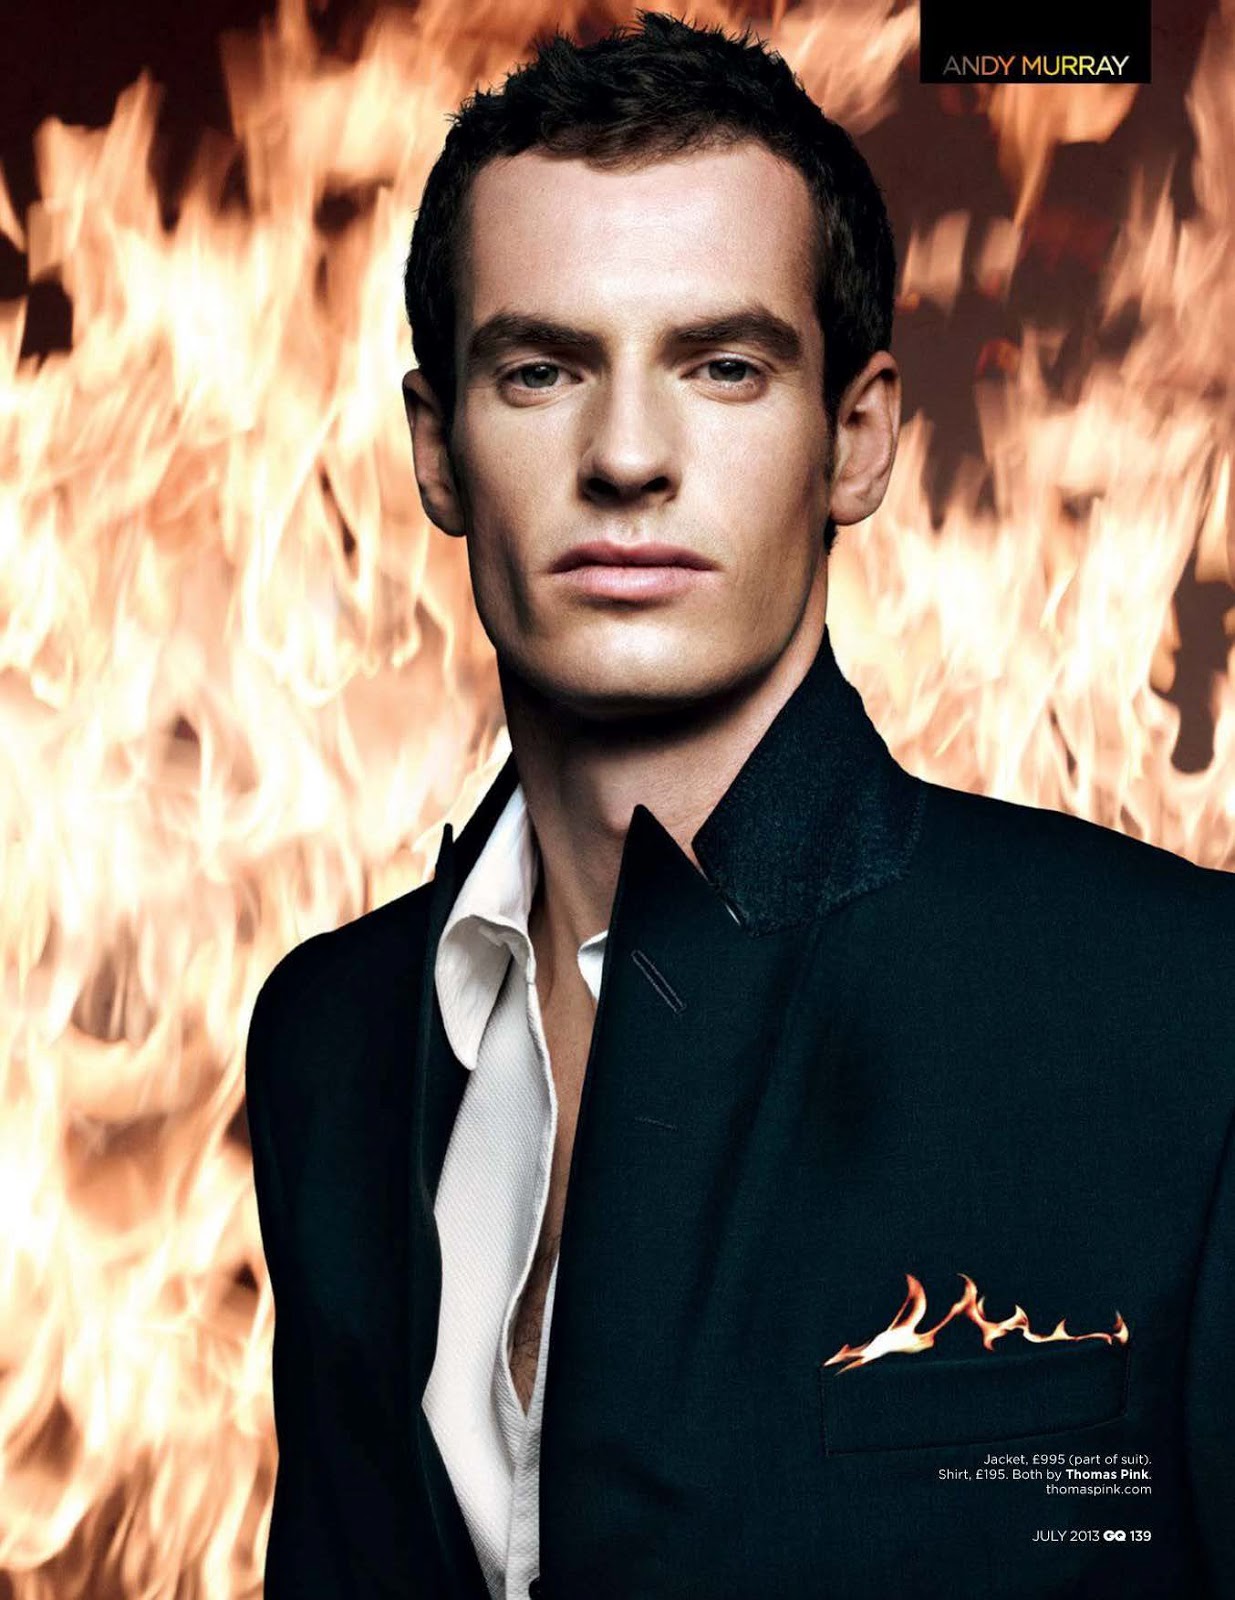 Andy+Murray+by+Art+Streiber+-+Andy+Murray+On+Fire+1a.jpg